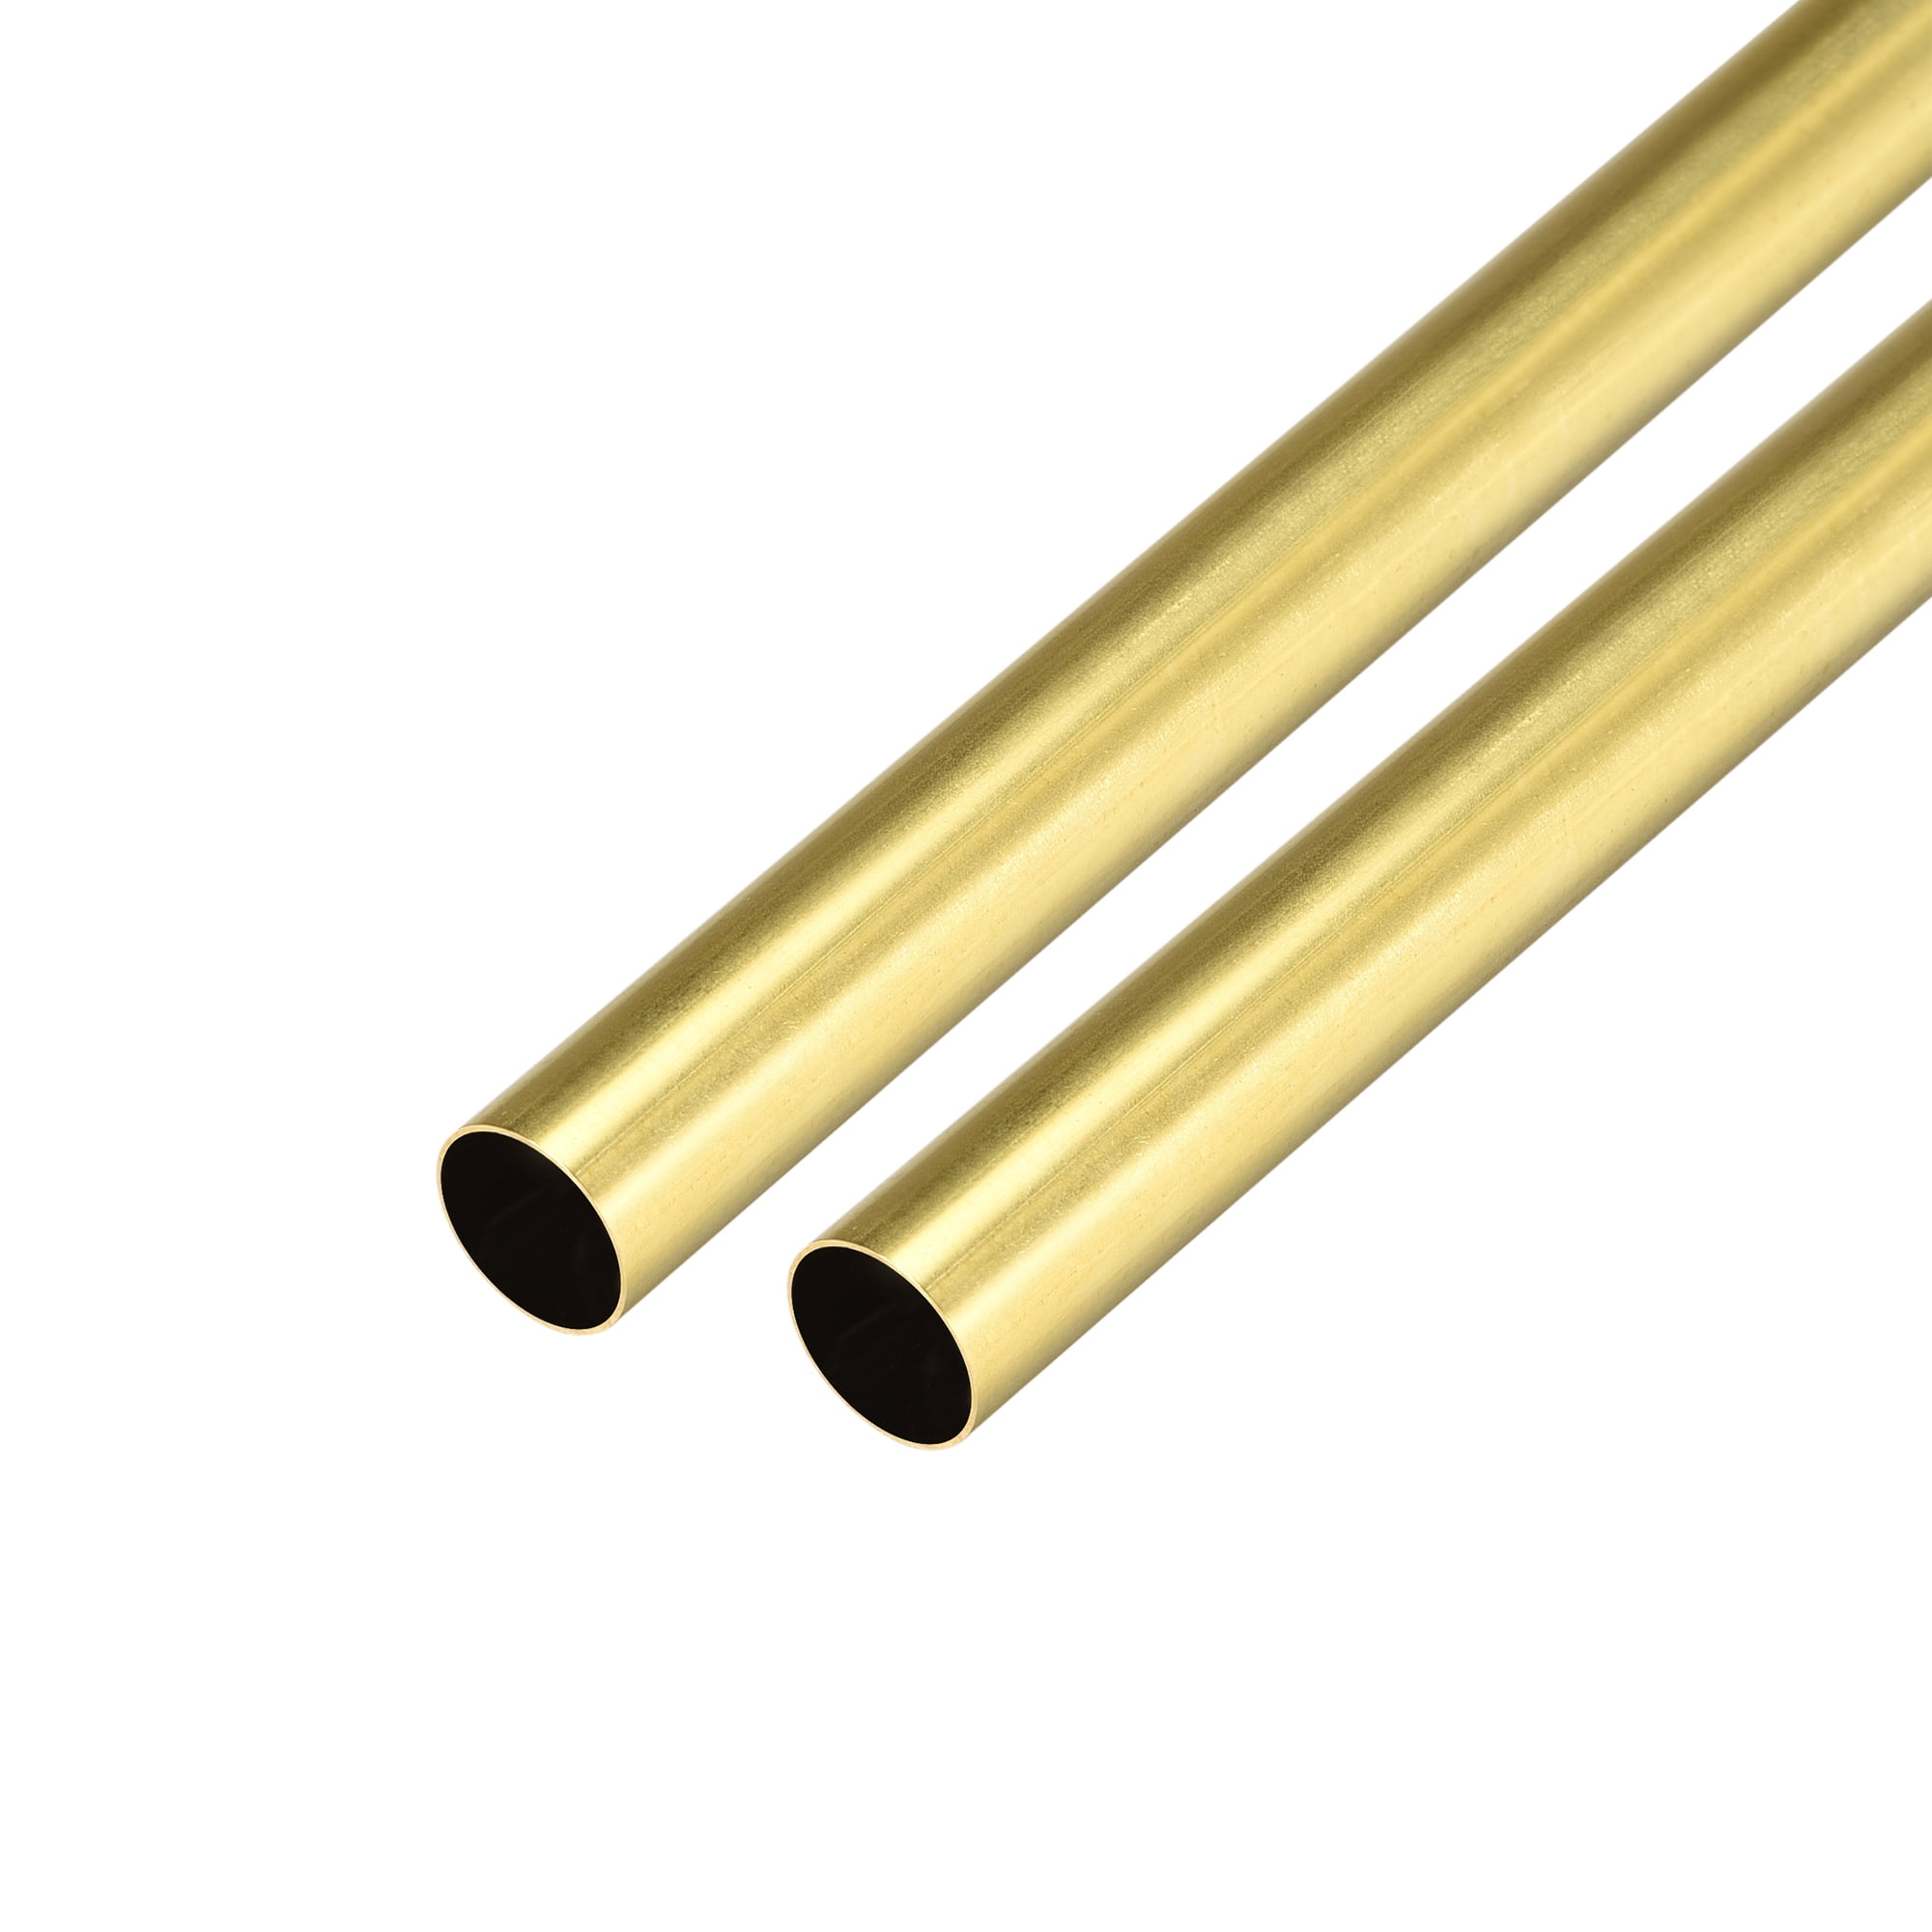 uxcell 5mm x 6mm x 500mm Brass Pipe Tube Round Bar Rod for RC Boat 